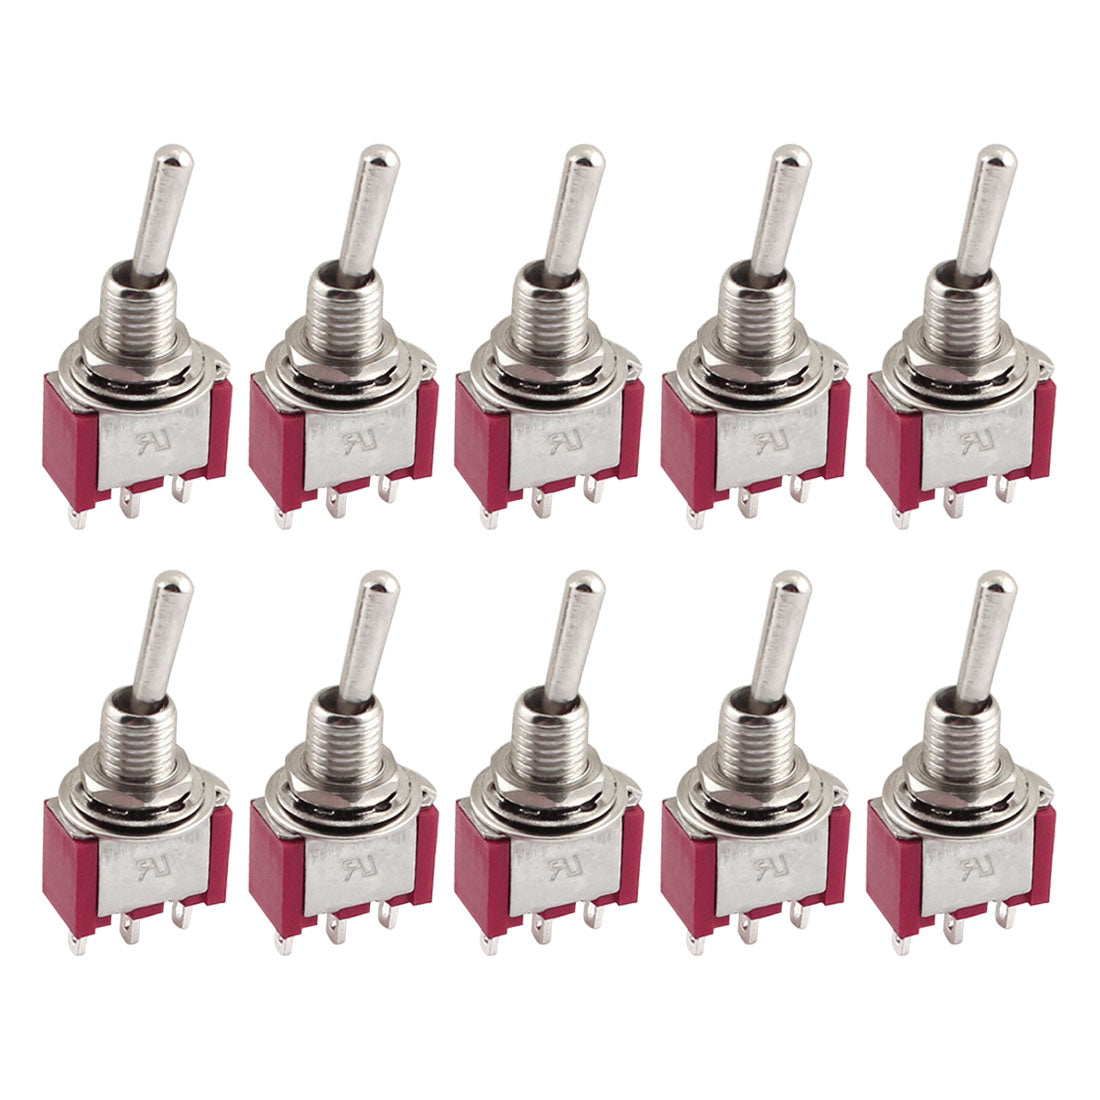 uxcell Uxcell 10 Pcs AC 250V/2A 120V/5A SPDT Red Metal 3 Position ON/OFF/ON 6mm Thread 3 Terminals Toggle Switch Red Lock